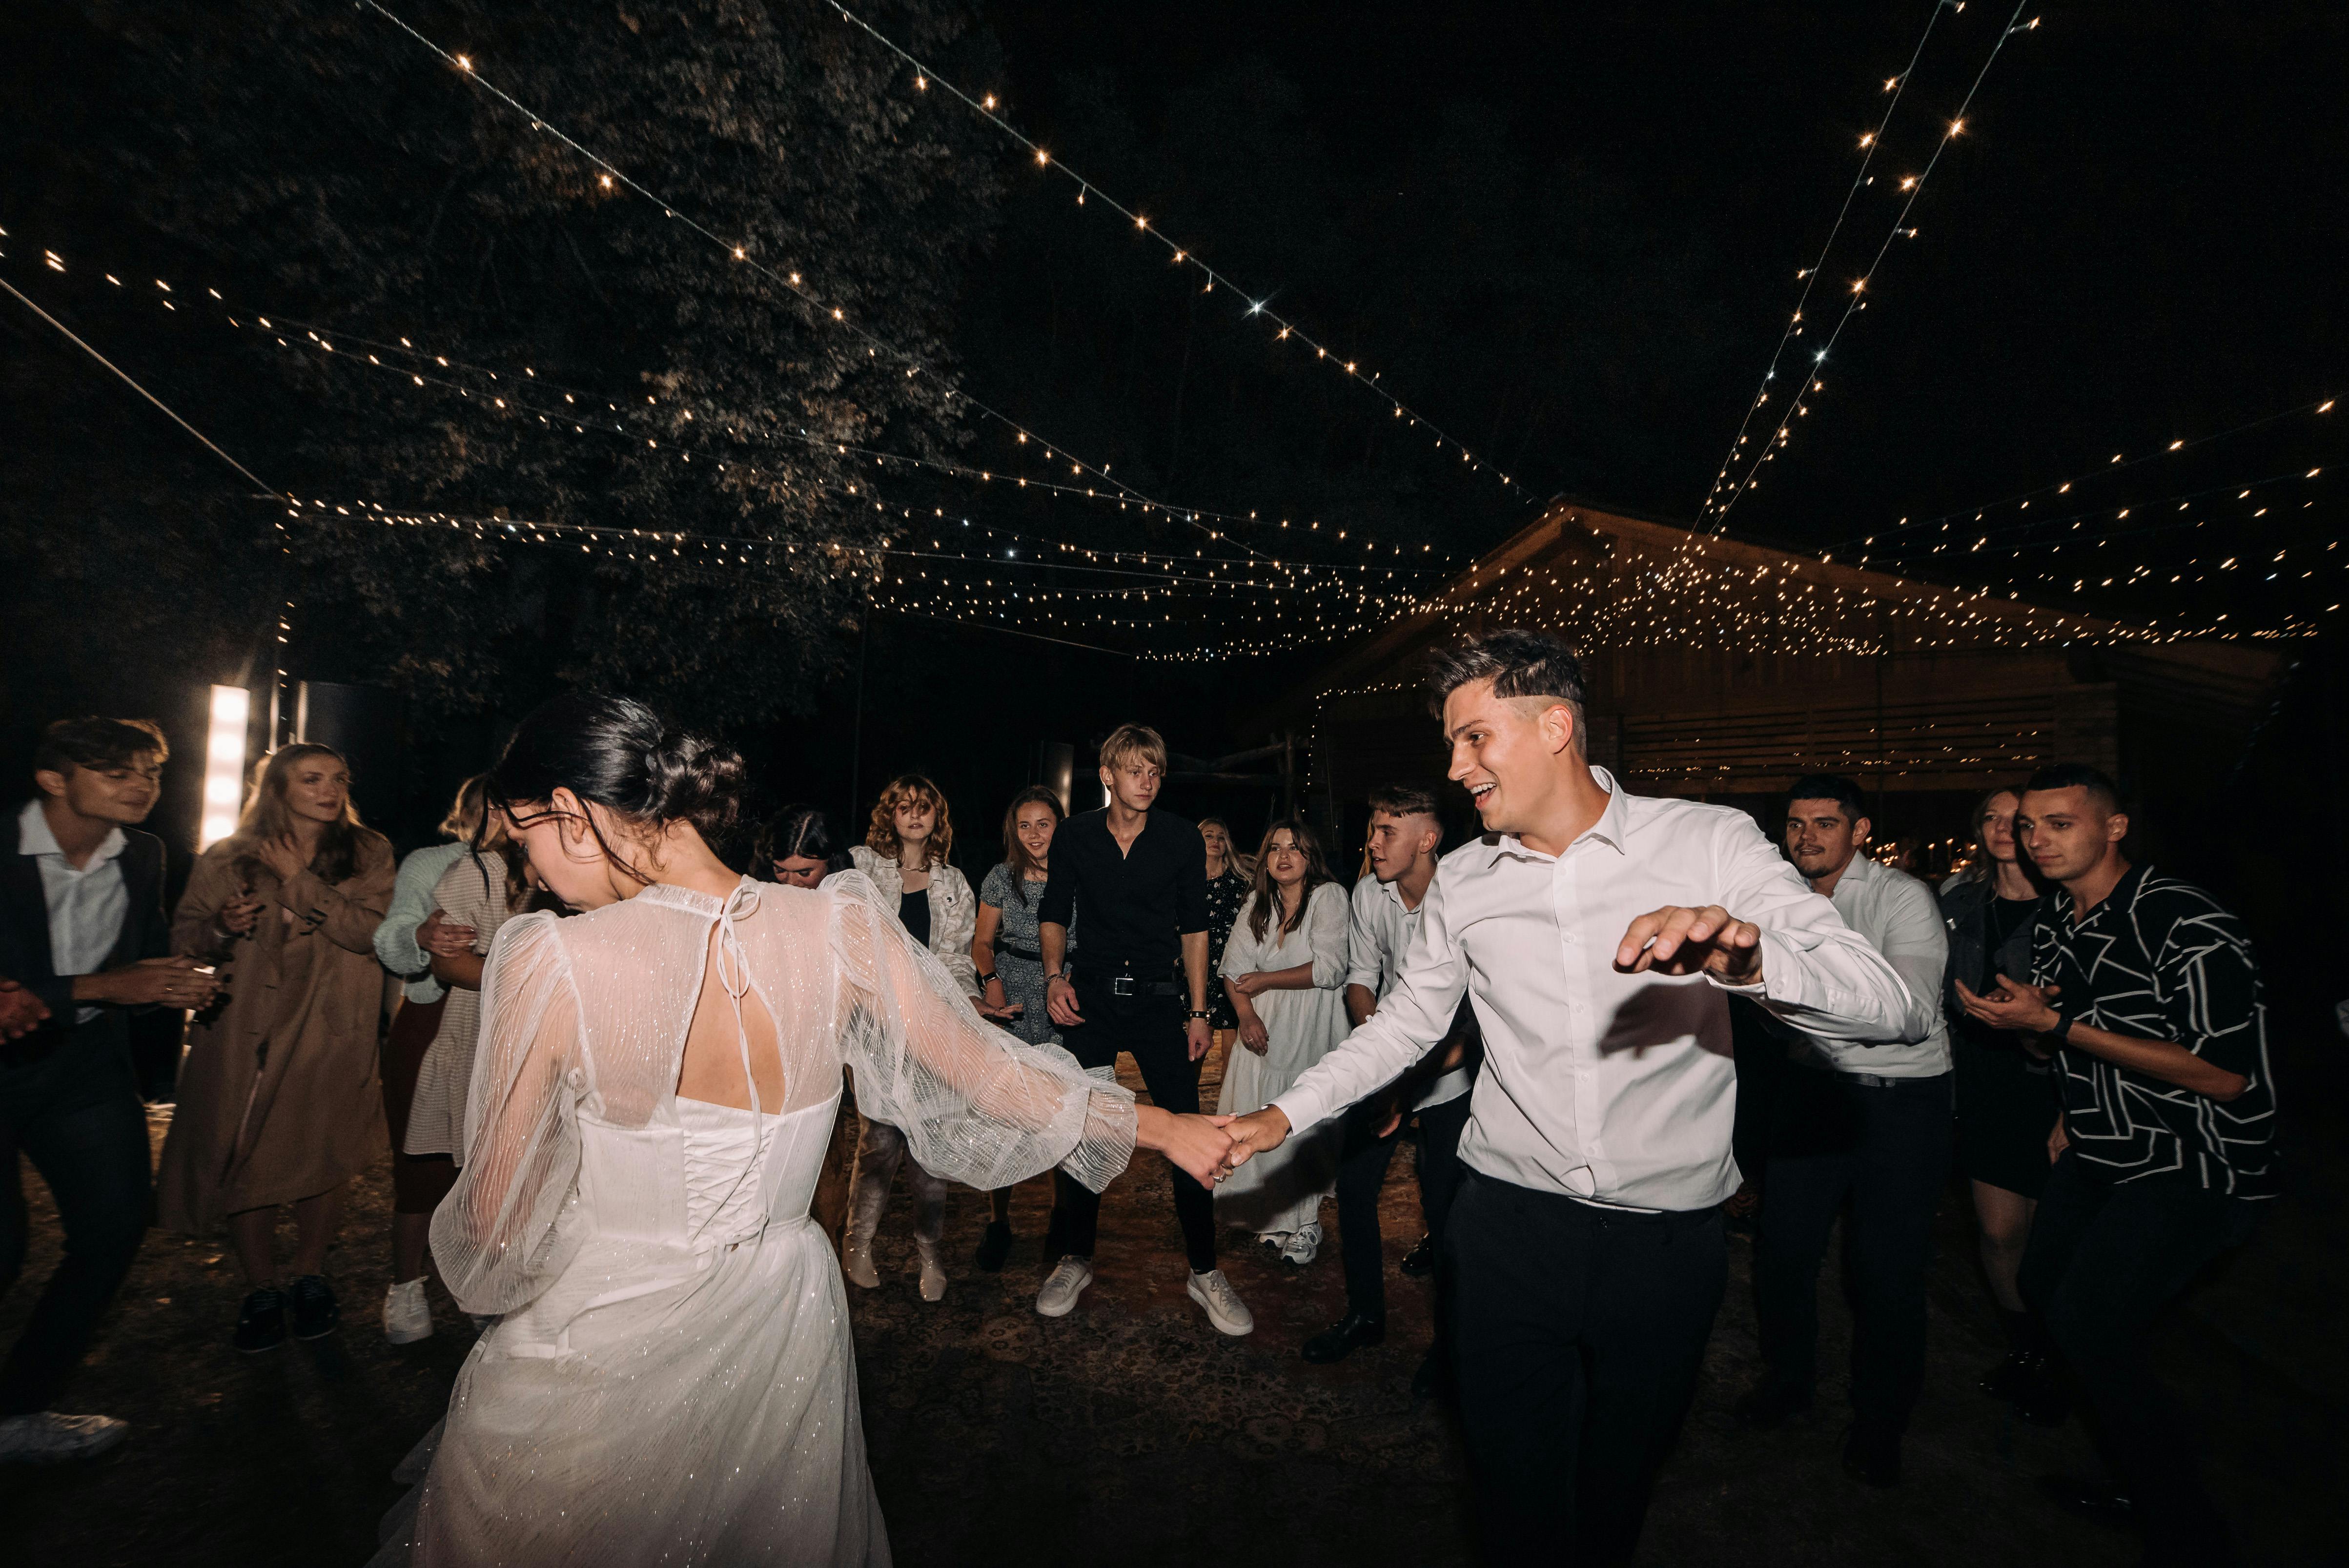 A couple dancing at their wedding as they guests look on | Source: Pexels